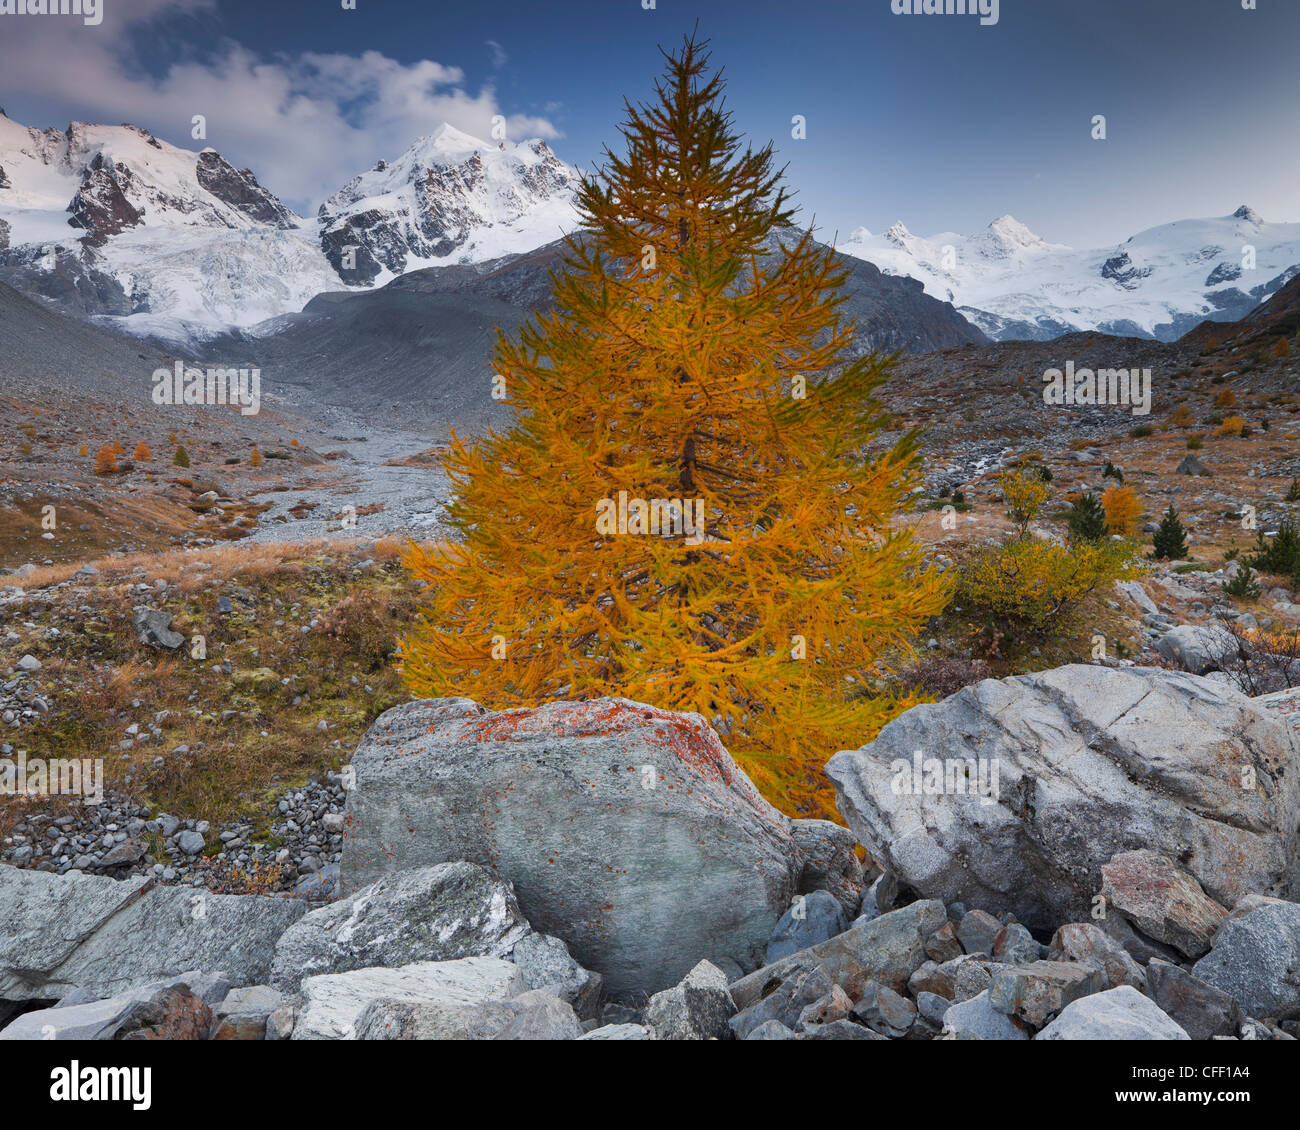 Stones and larch in front of snow covered mountains, Val Roseg, Piz Bernina, Piz Roseg, Grisons, Switzerland, Europe Stock Photo